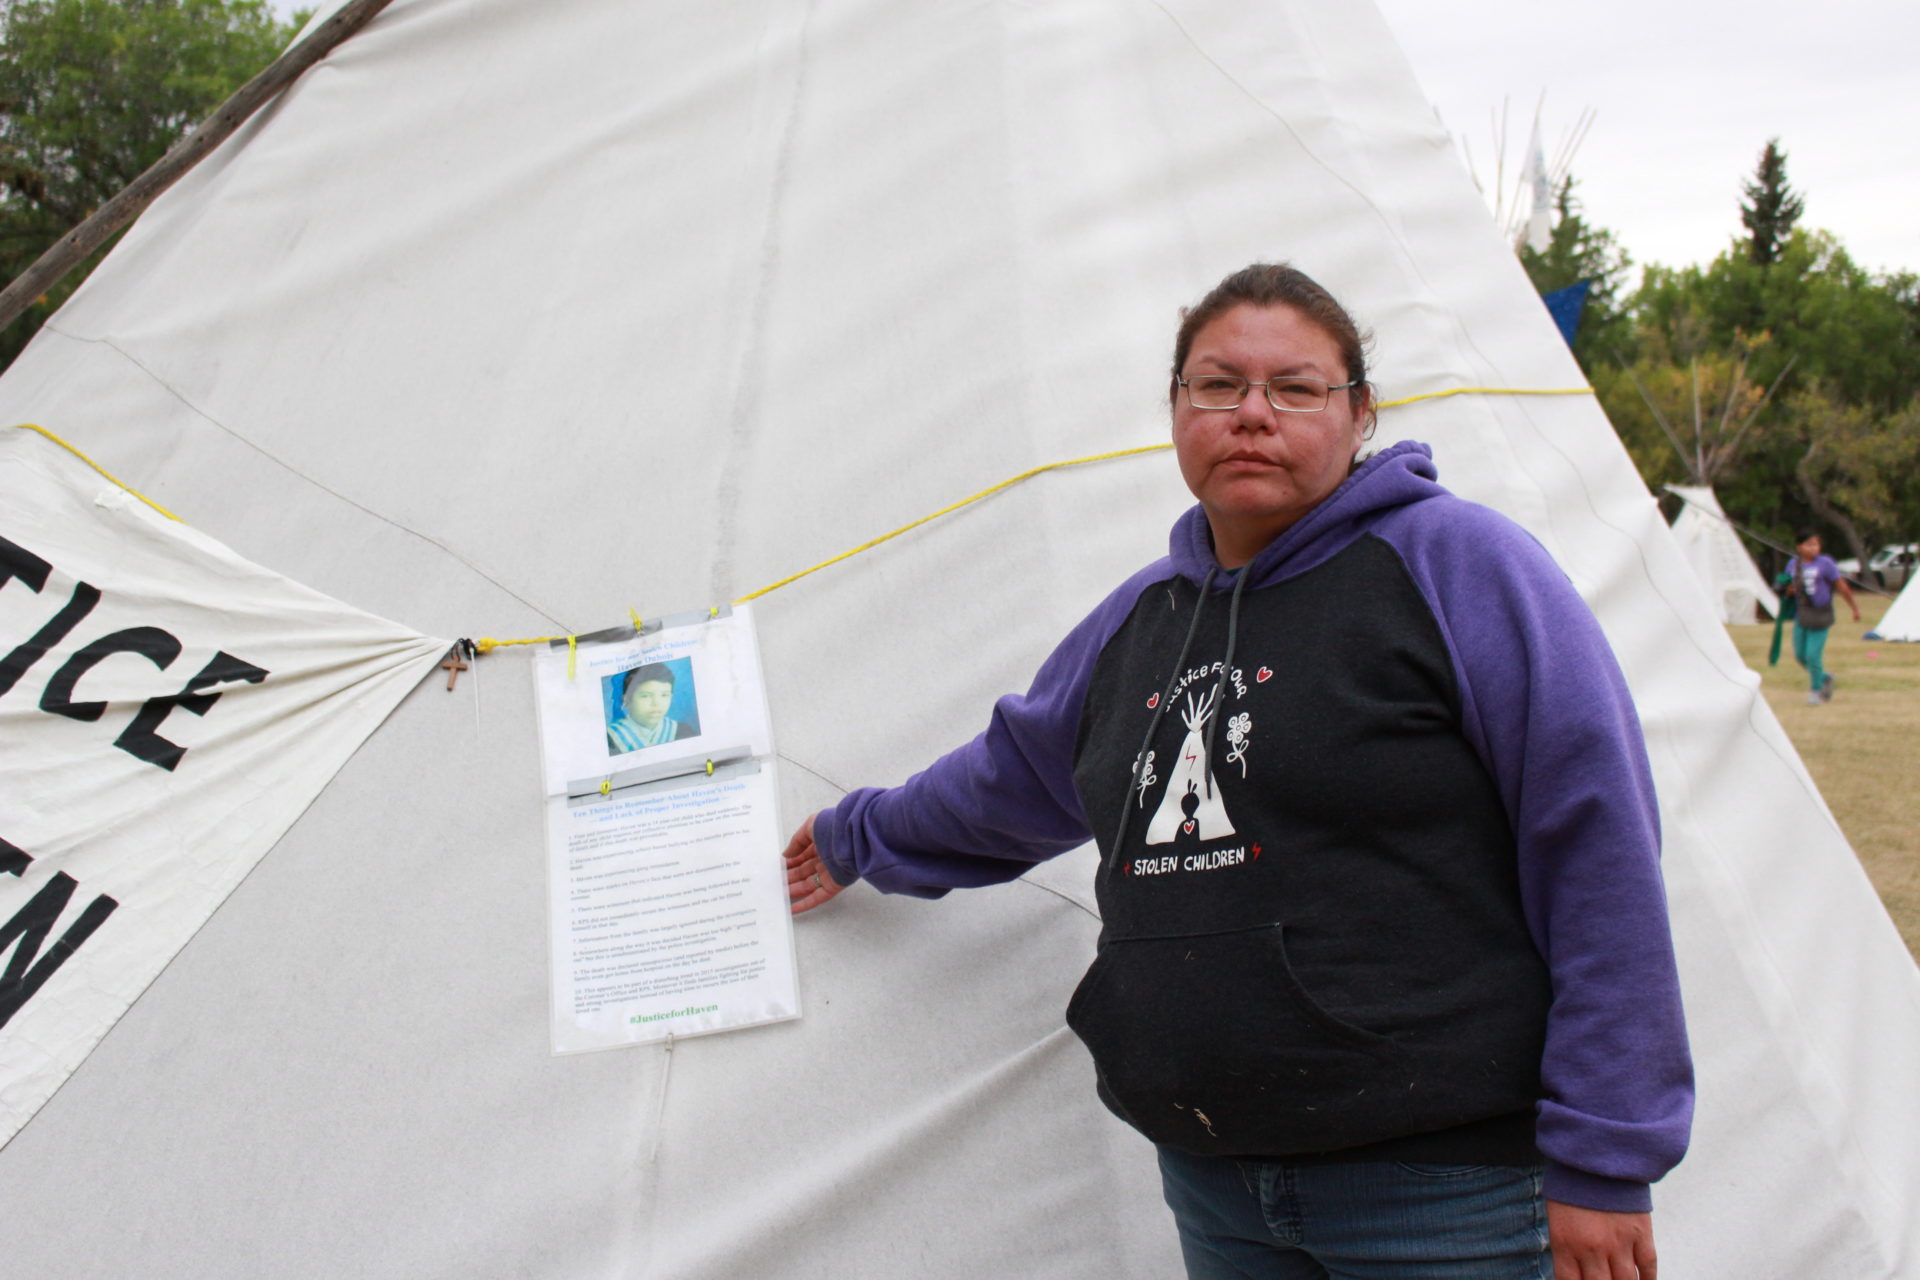 Richelle Dubois stands beside a sign discussing the issues in the police investigation into the death of her son, Haven, at the Justice for Our Stolen Children protest camp in Regina, Sask., on Sept. 2, 2018. (Photo: Alexa Lawlor)